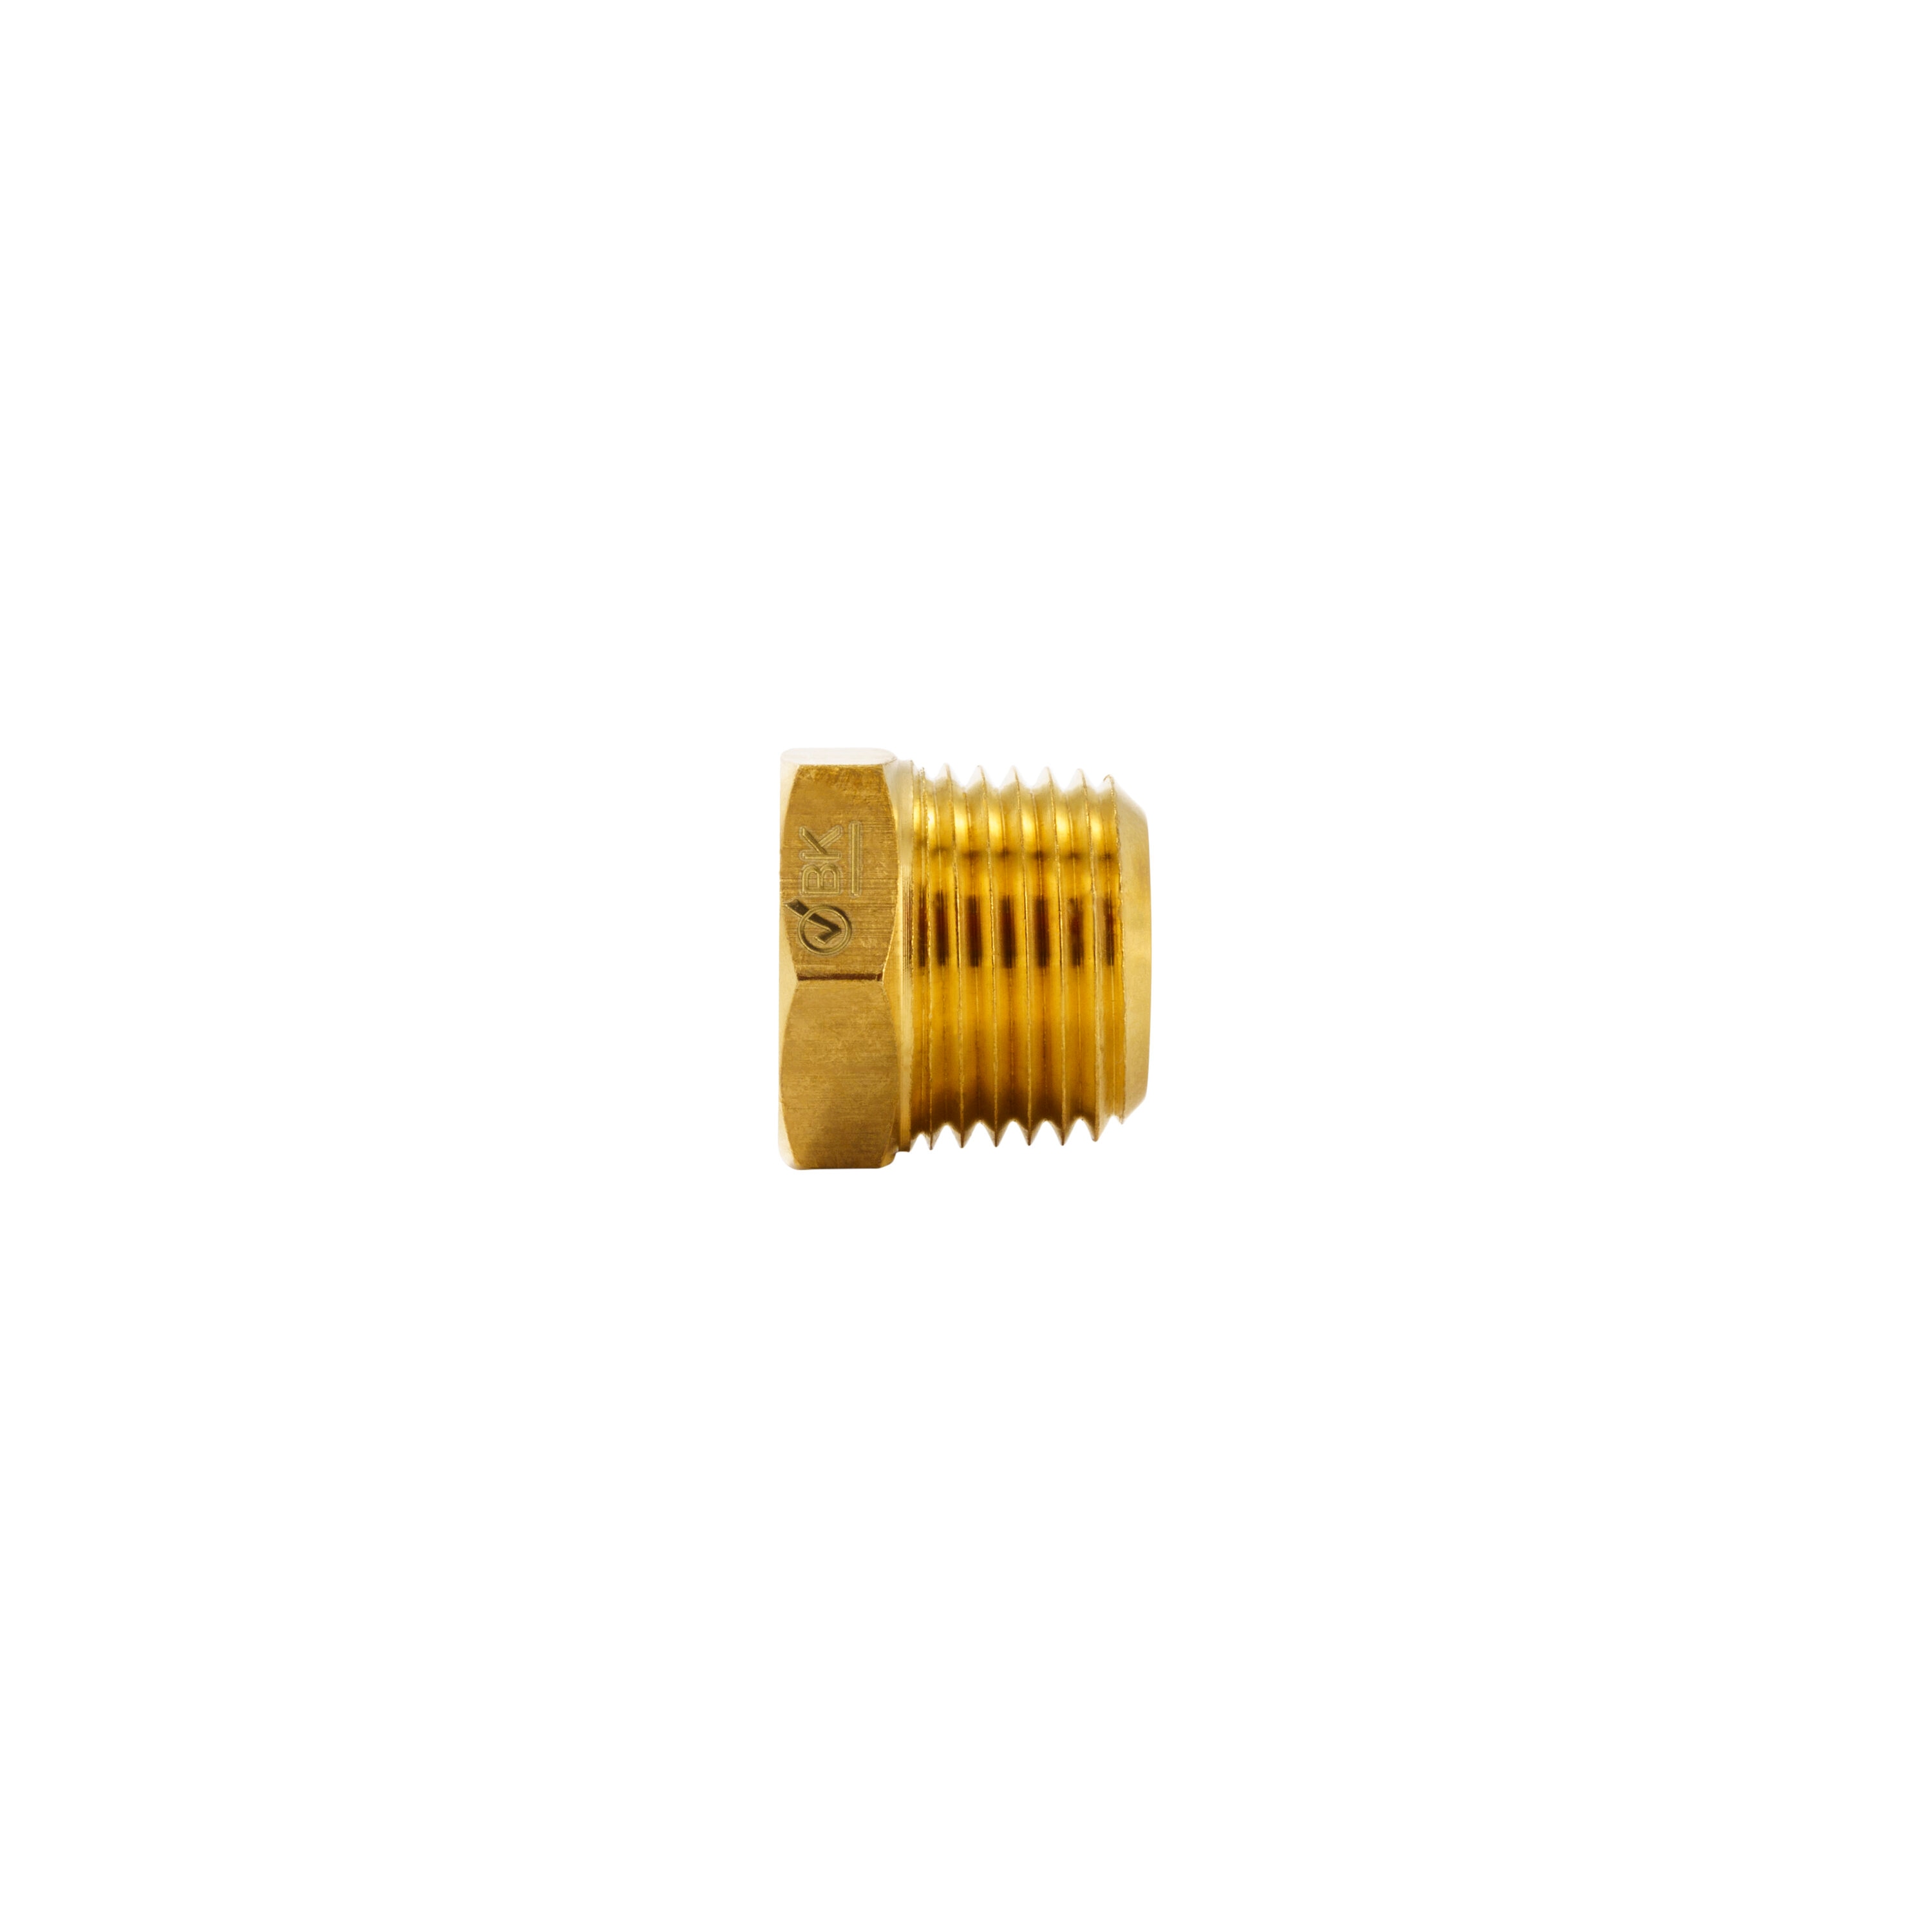 Legines Brass Compression Tubing Fitting, Female Connector, 1/8 Tube OD x  1/8 NPT Female, Pack of 2